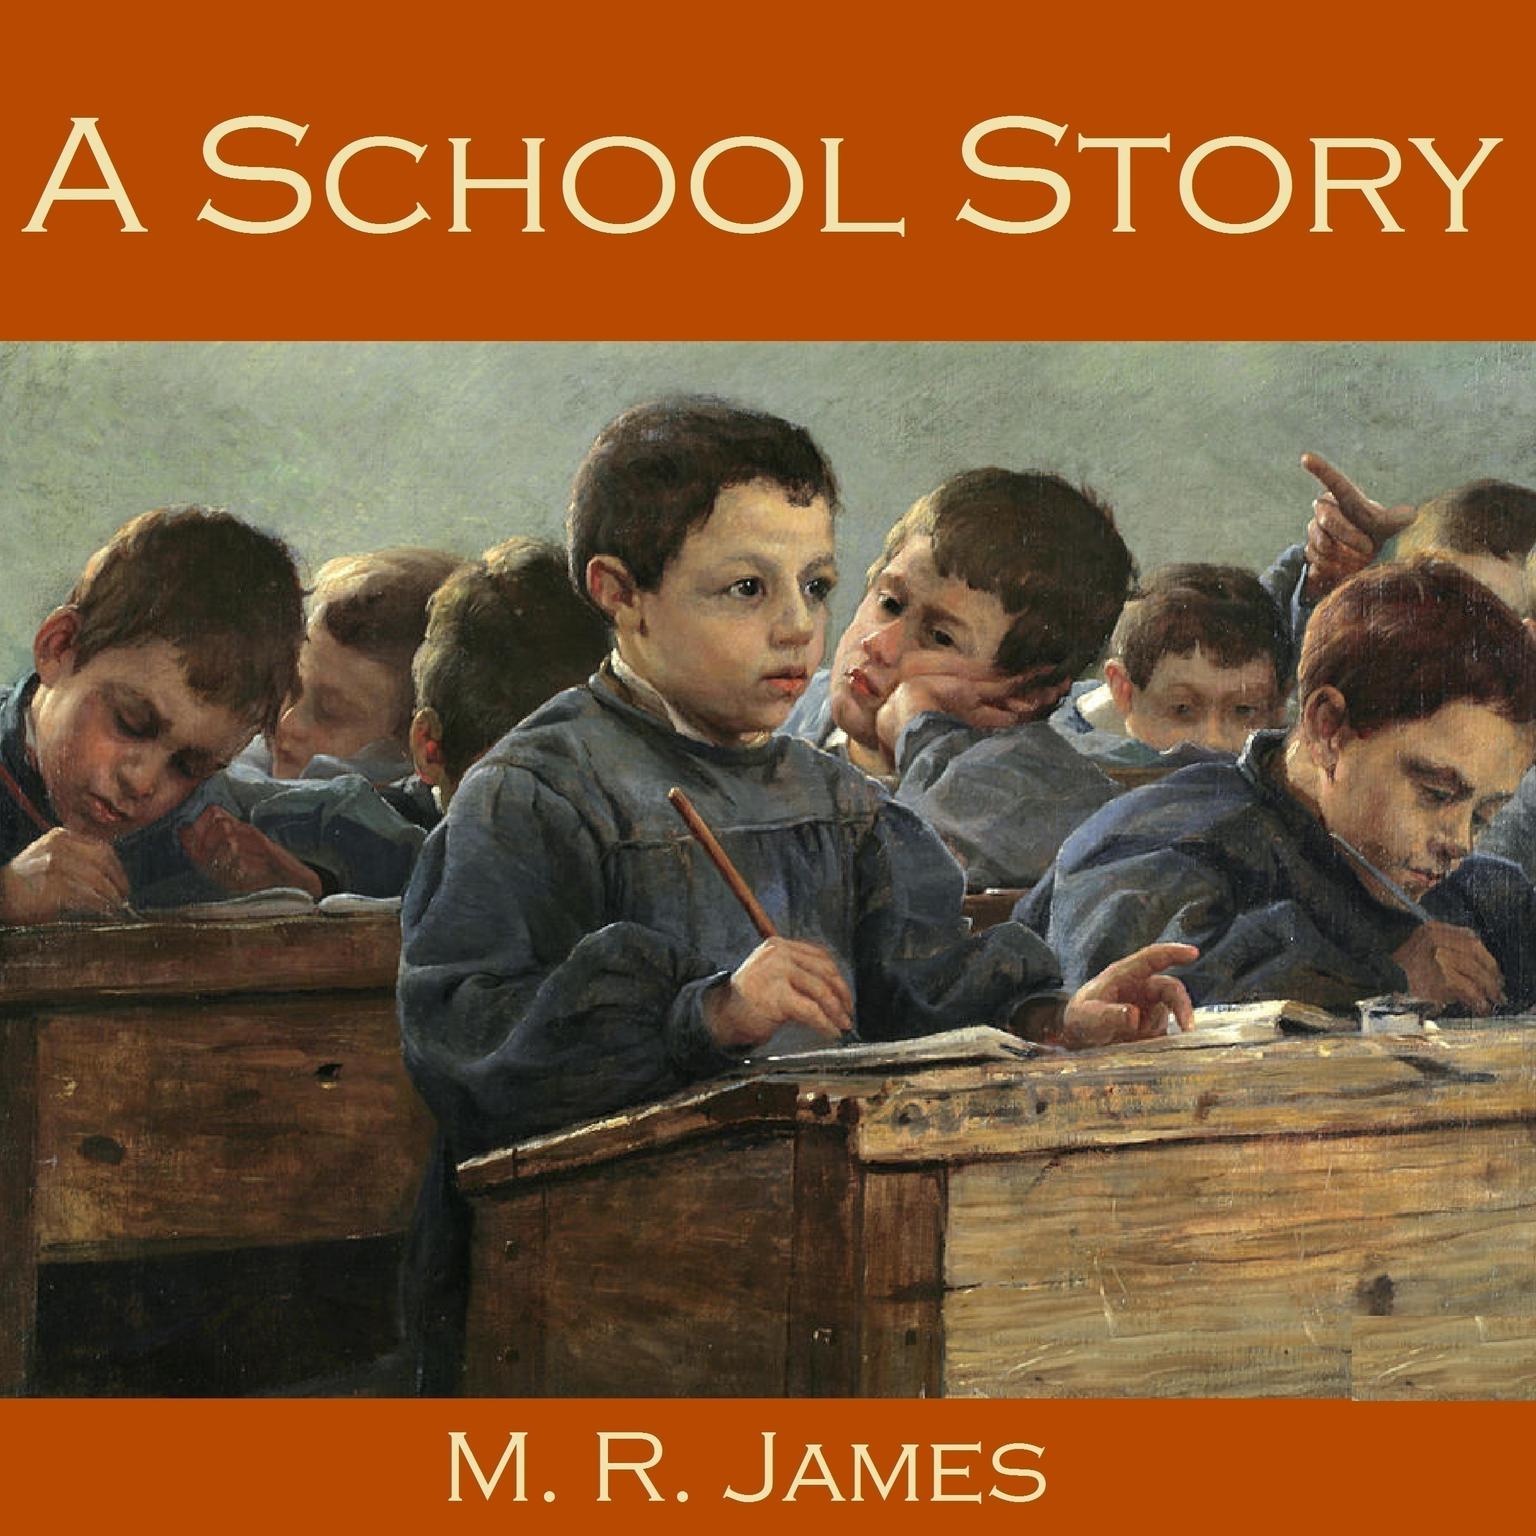 A School Story Audiobook, by M. R. James